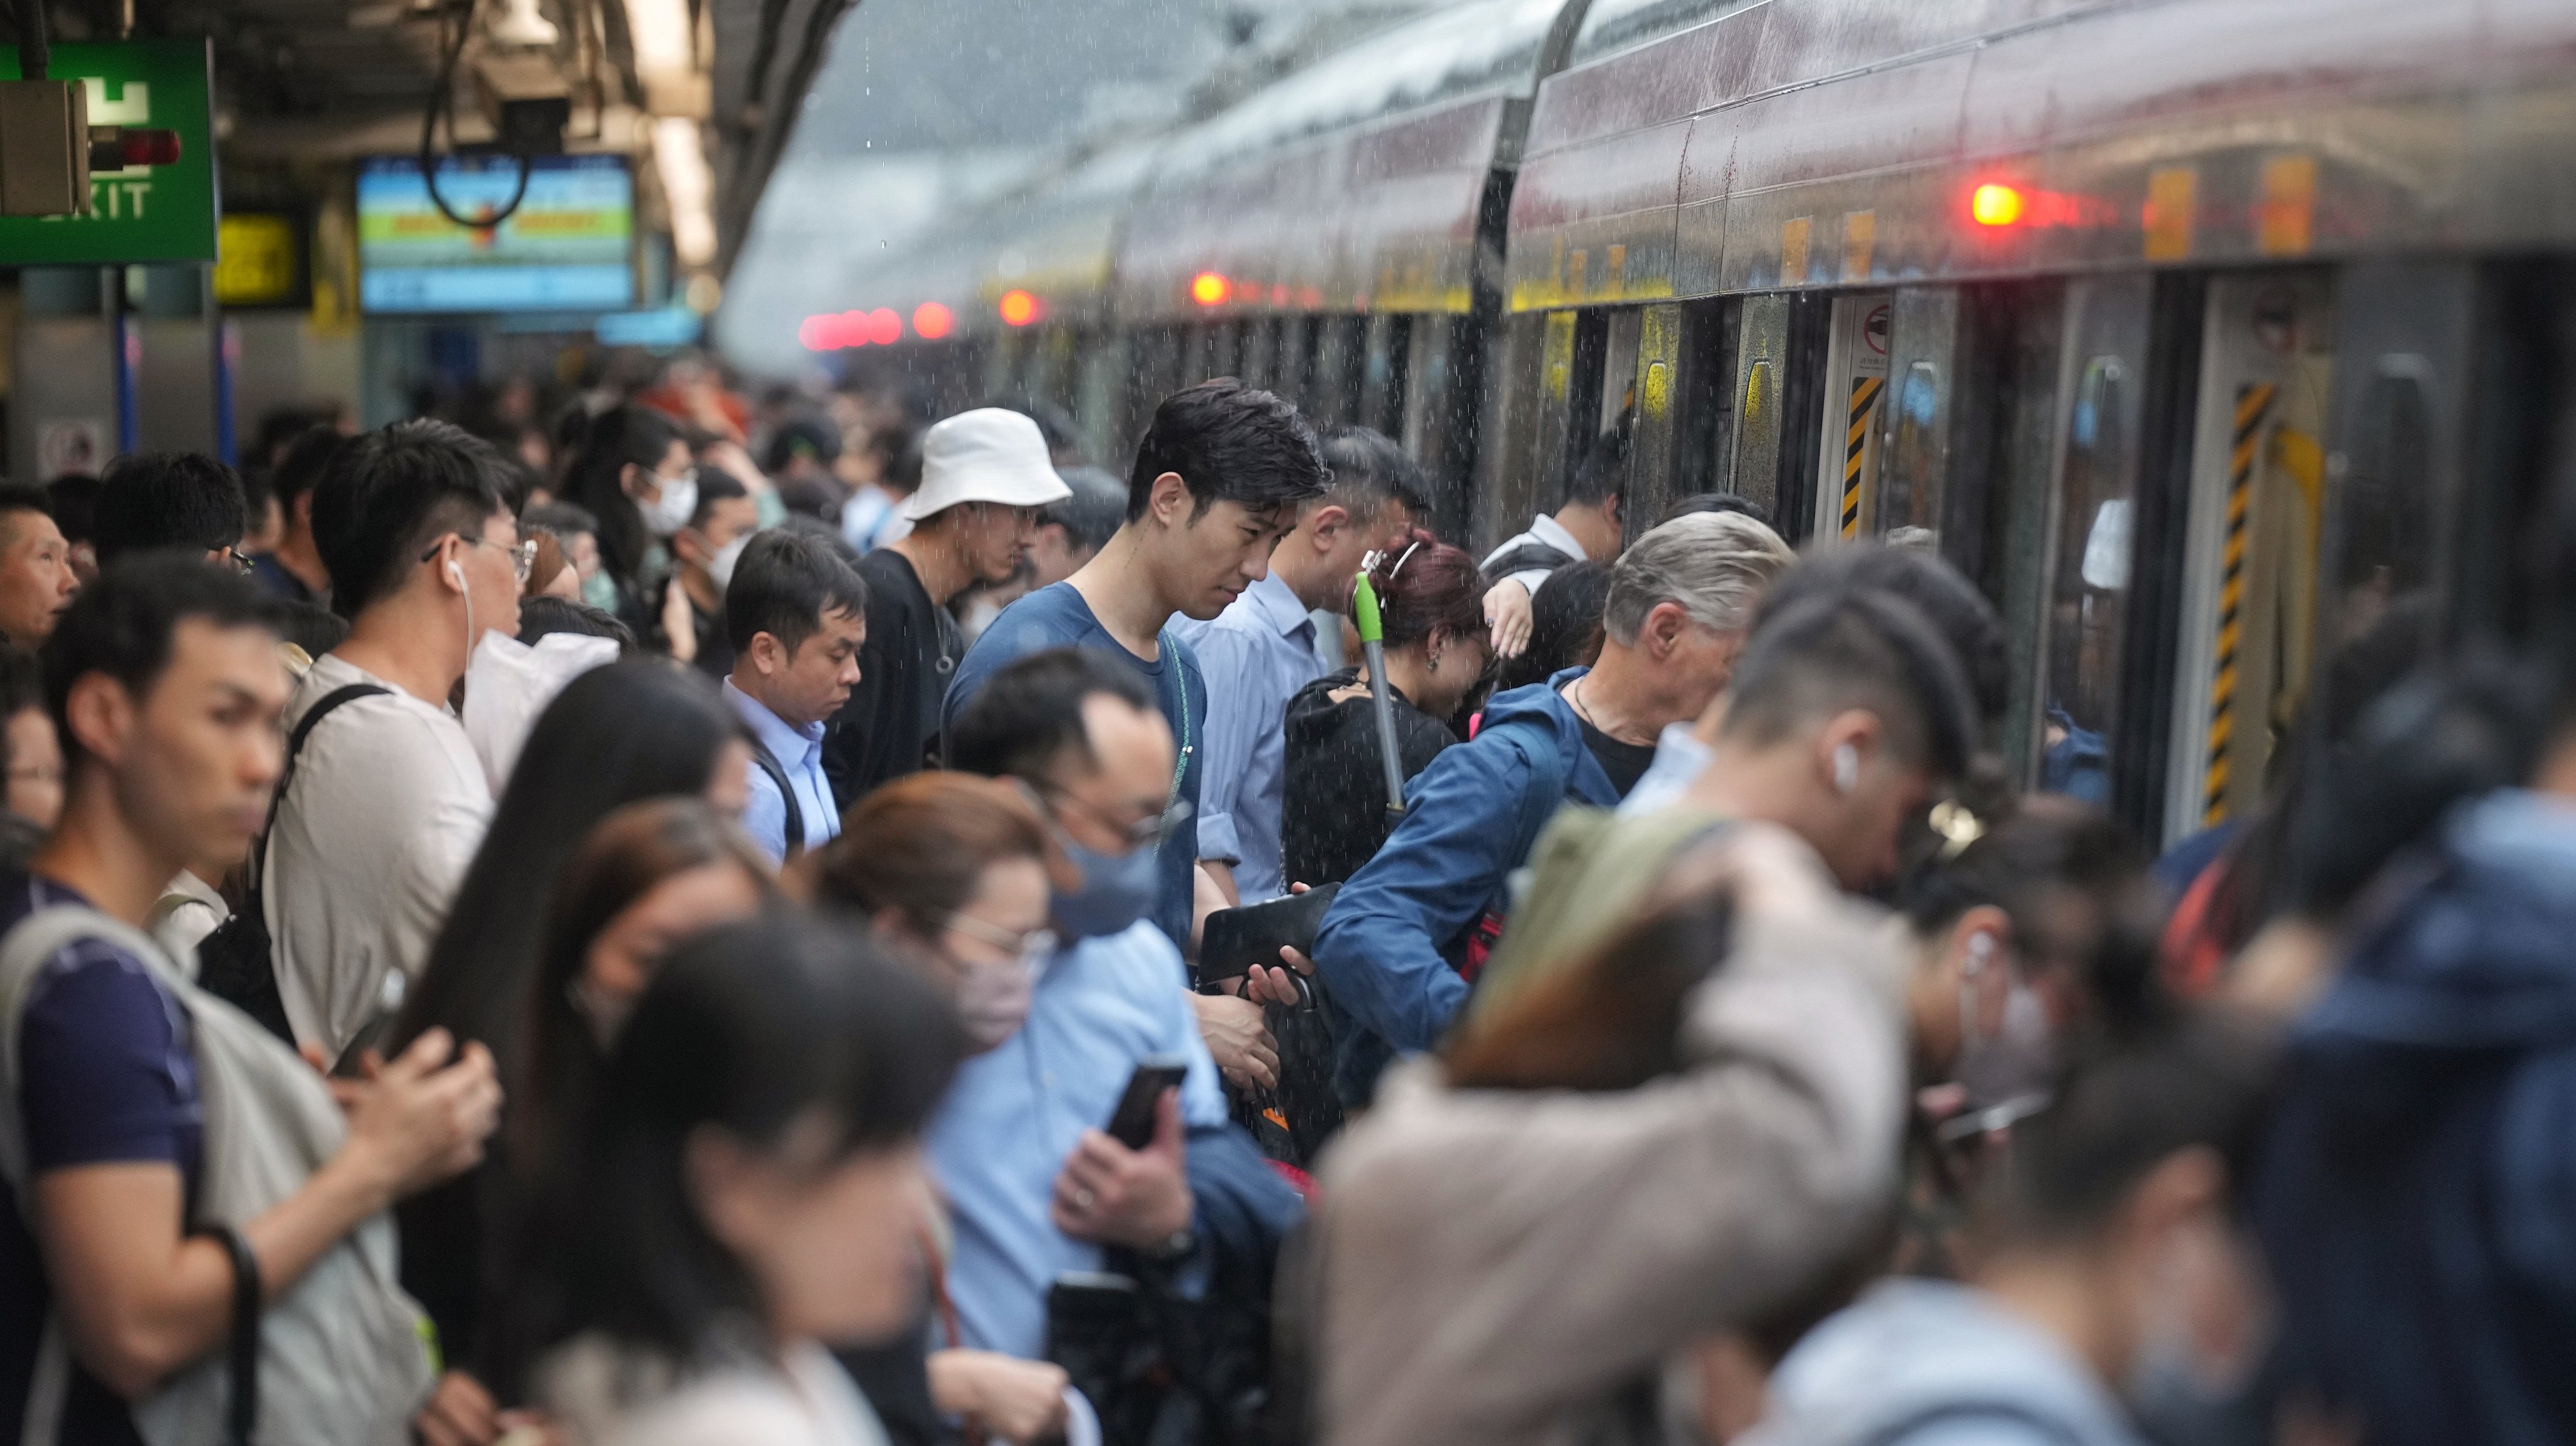 People board a train at Hong Kong’s Tai Wai MTR station in the morning of October 9 last year. Urban centres in Europe and elsewhere are considering the feasibility of the 15-minute city, where daily conveniences are located around one’s residence. Photo: Elson LI